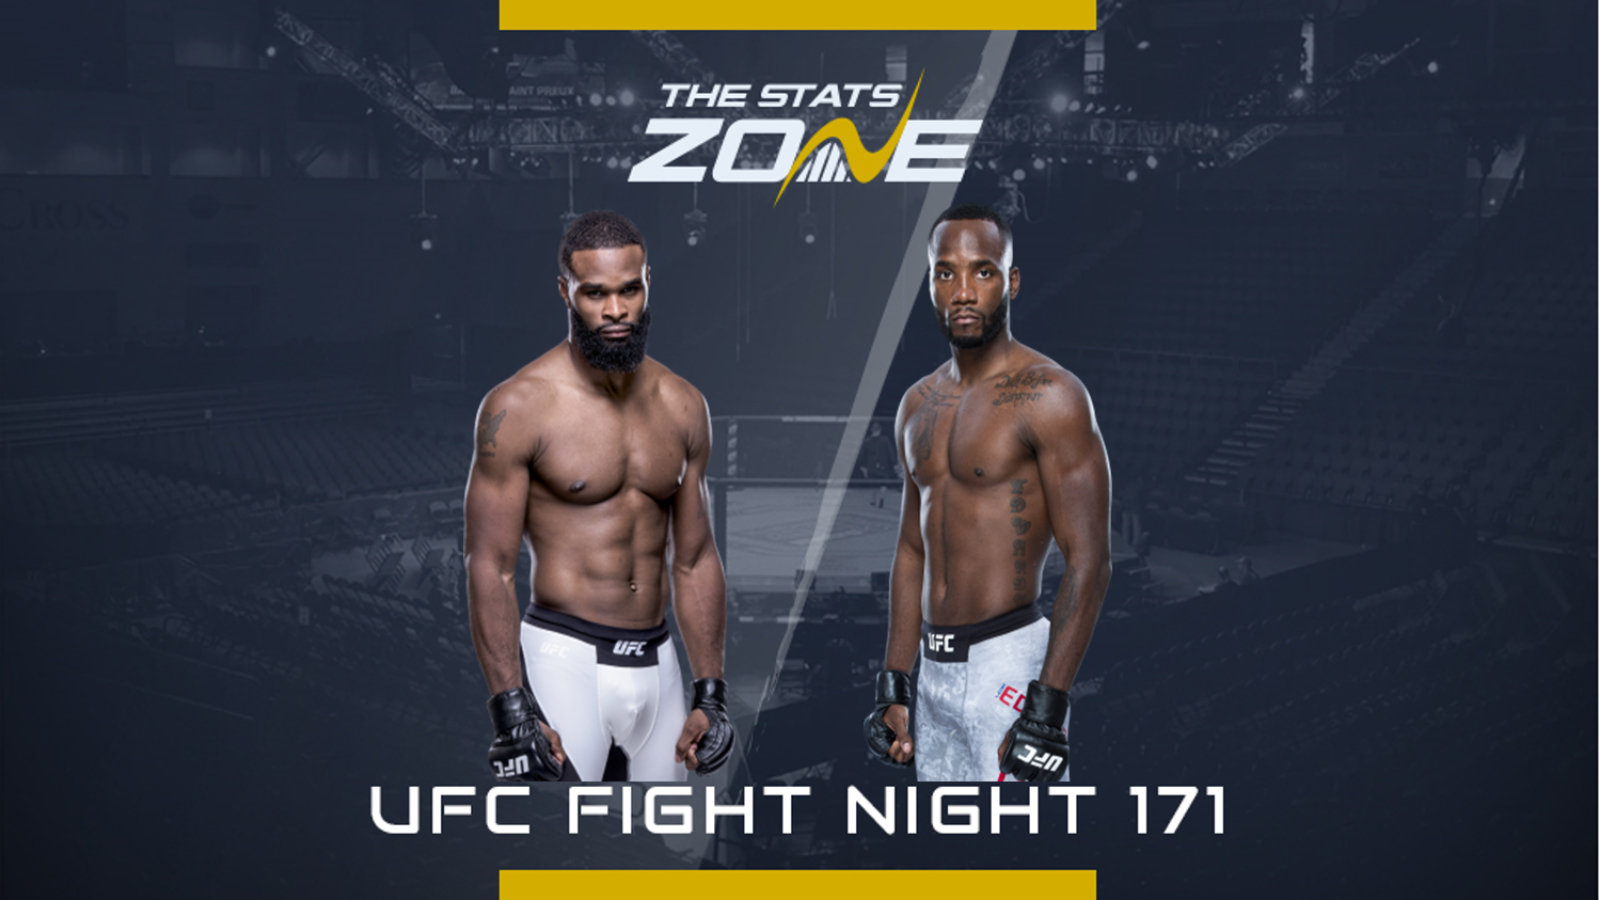 Mma Preview Tyron Woodley Vs Leon Edwards At Ufc Fight Night 171 The Stats Zone